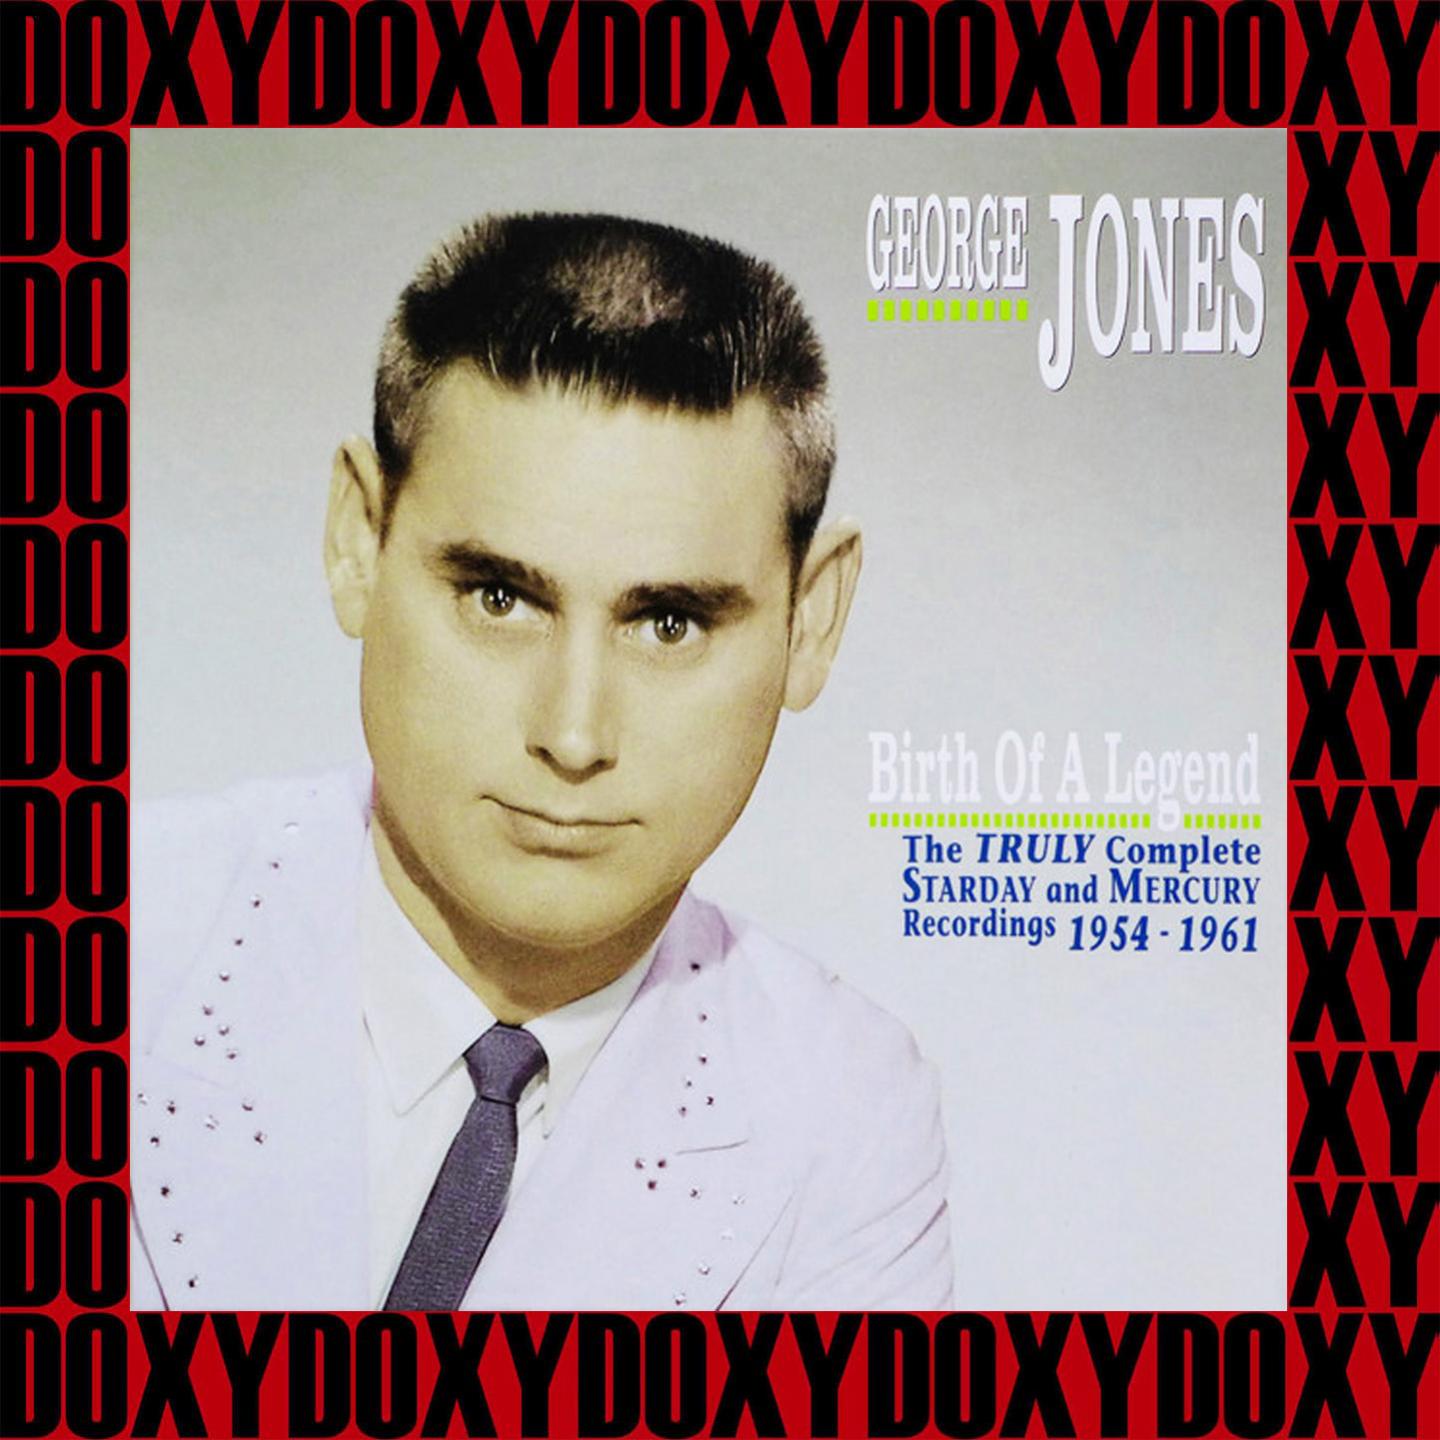 Birth Of A Legend, 1954-1961 Vol. 3 (Remastered Version) (Doxy Collection)